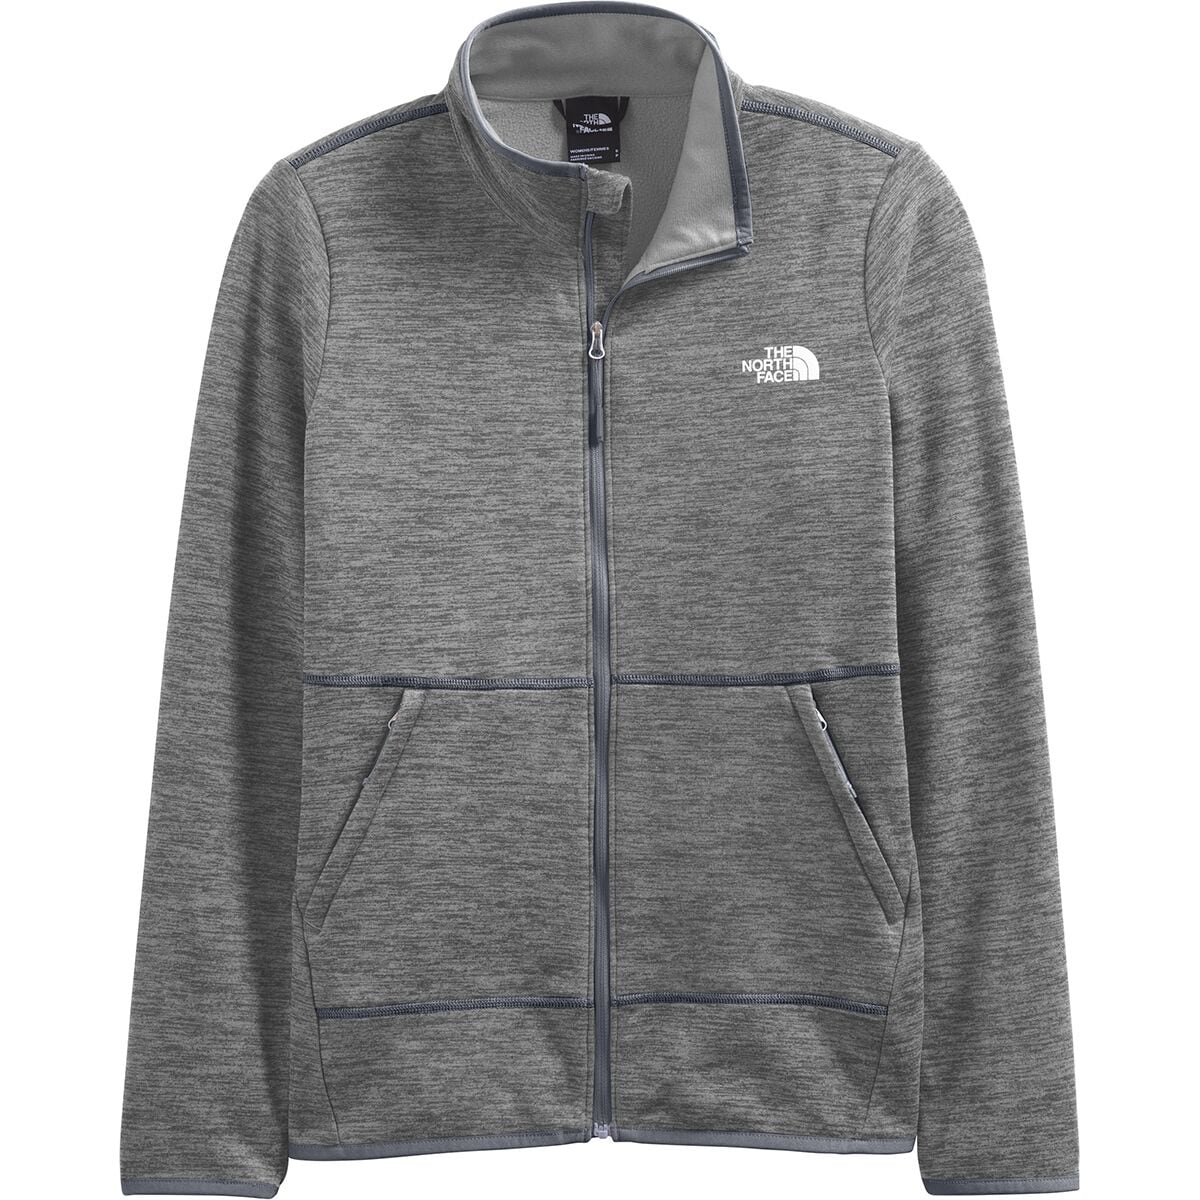 The North Face Canyonlands Full-Zip Jacket - Women's